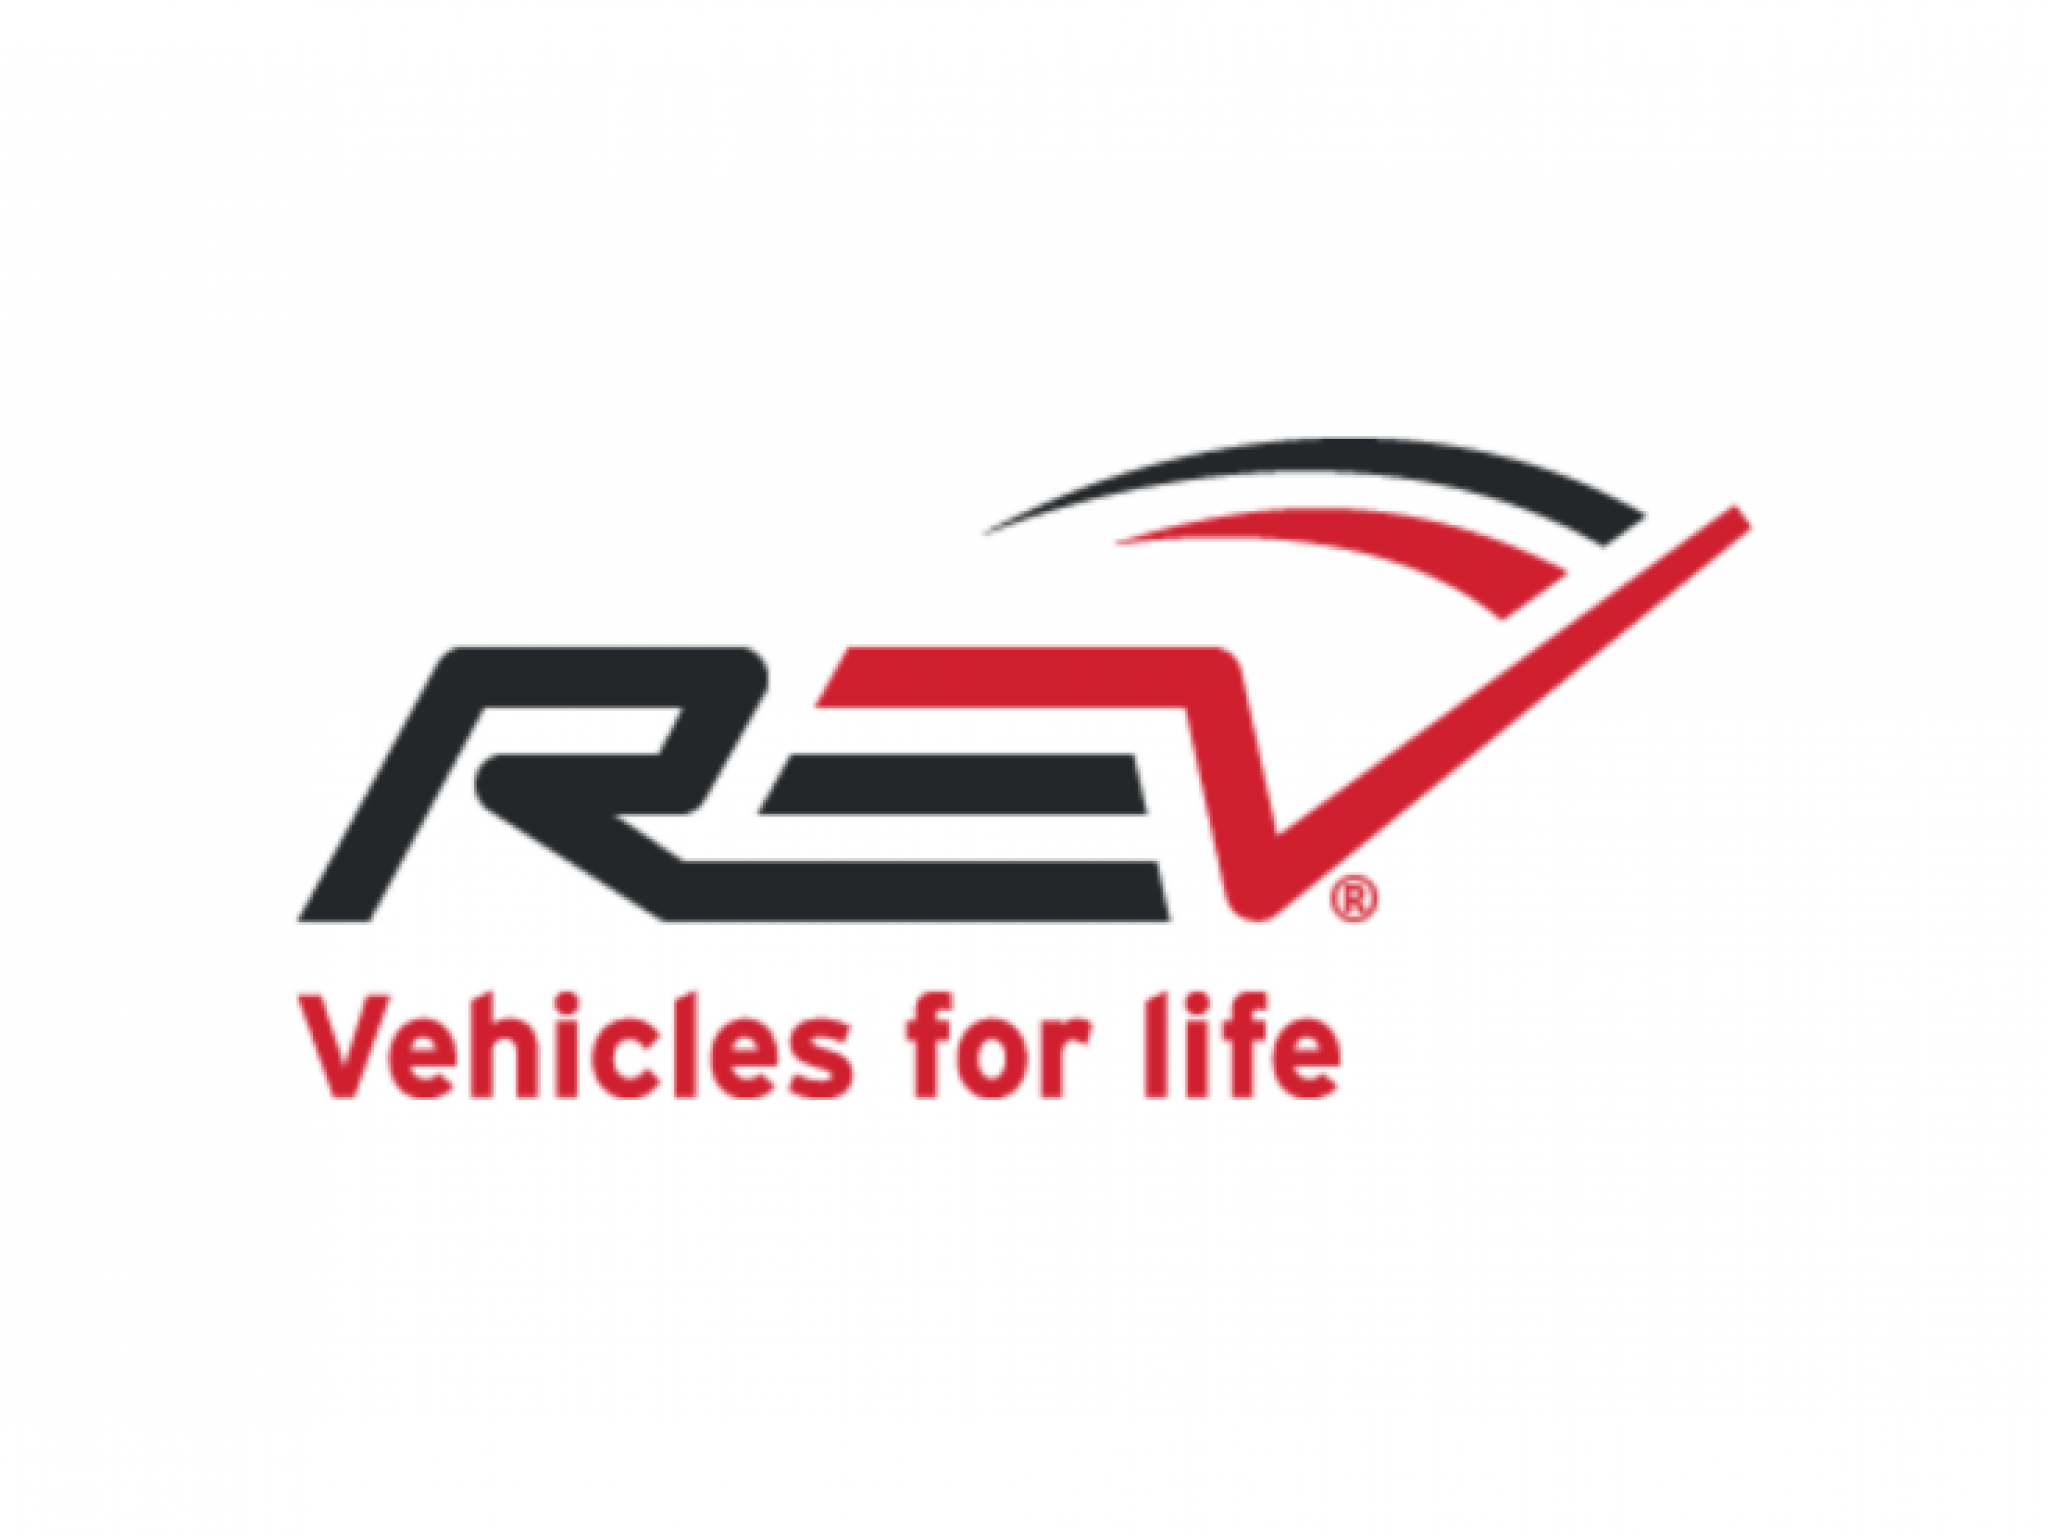  specialty-vehicles-manufacturer-rev-group-shares-are-surging-today-whats-going-on 